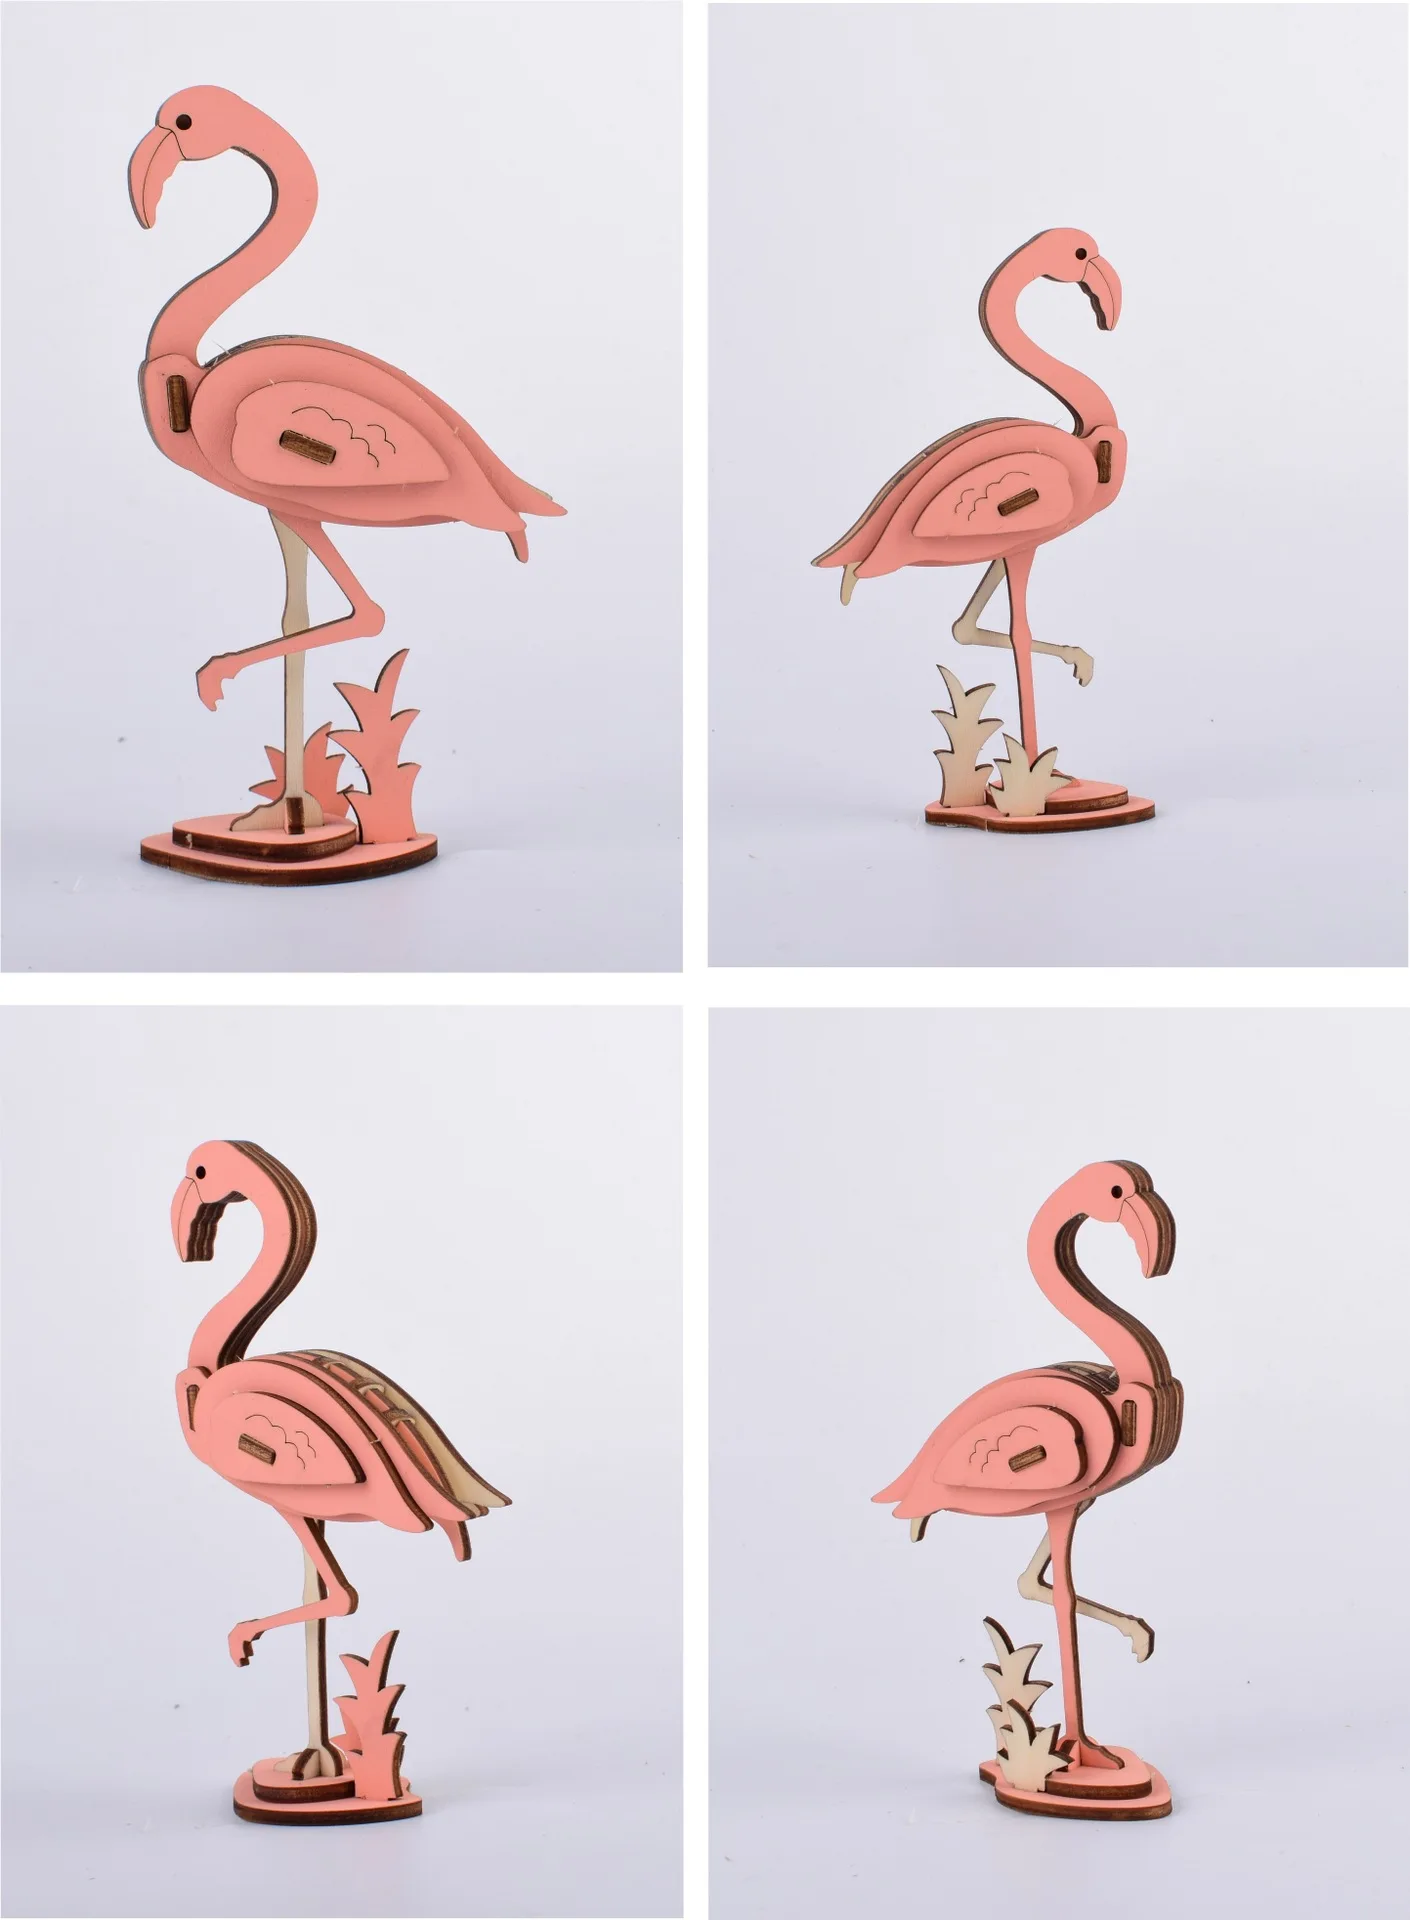 Childrens Wooden 12 Piece Puzzle Educational With Flamingo Picture 